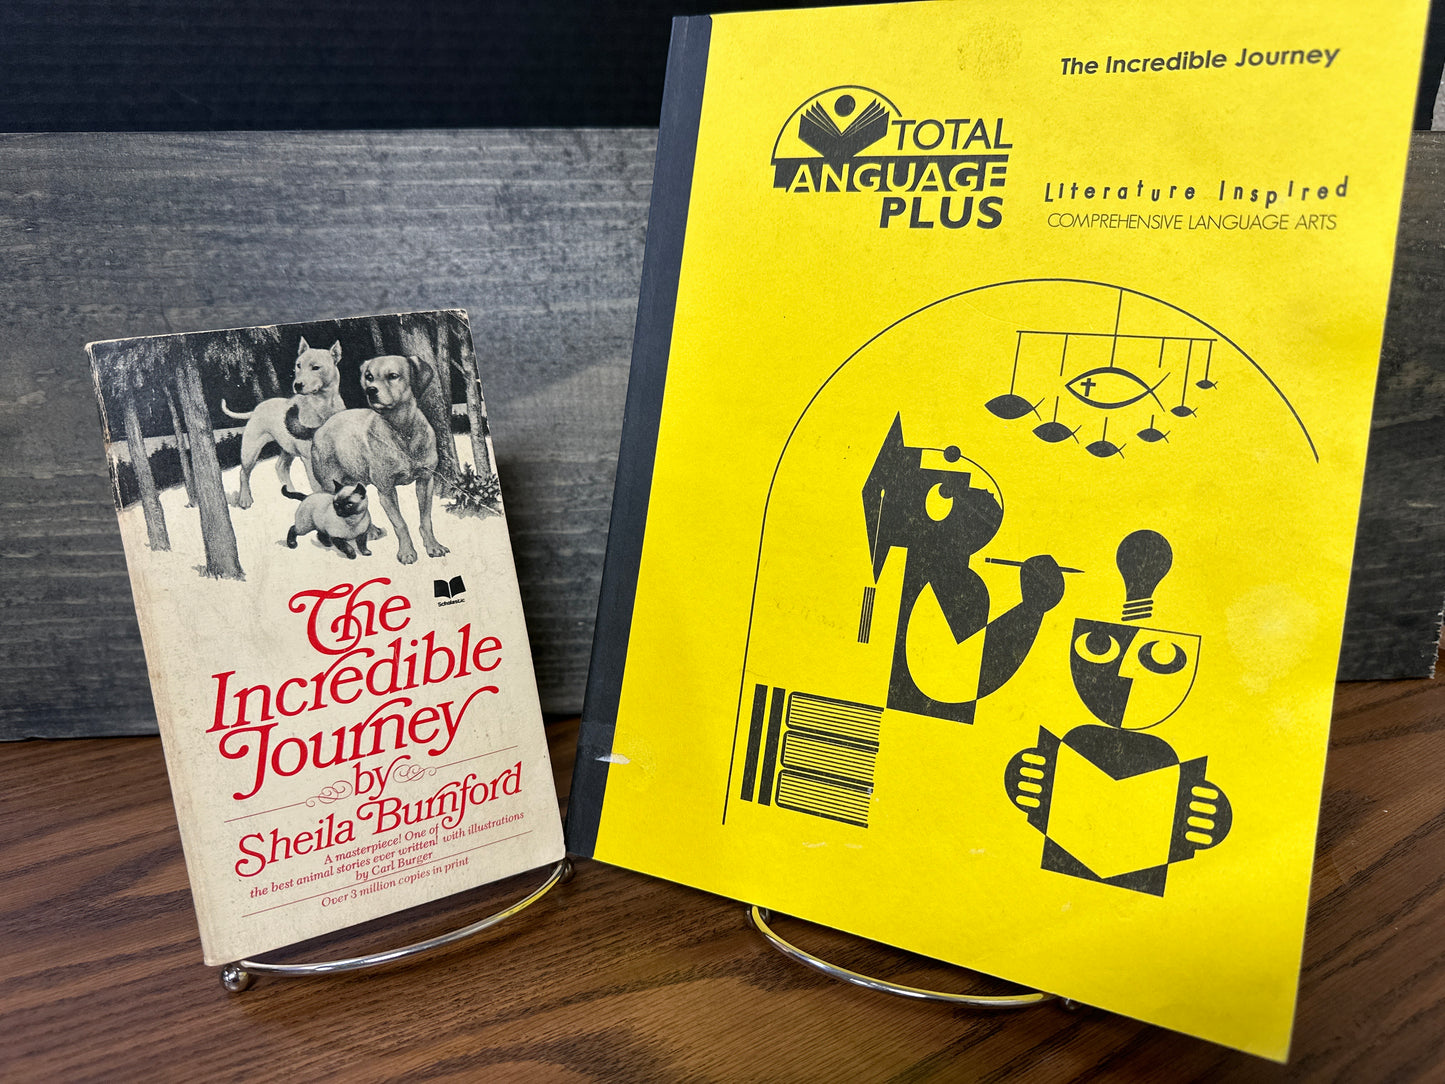 The Incredible Journey study/book set